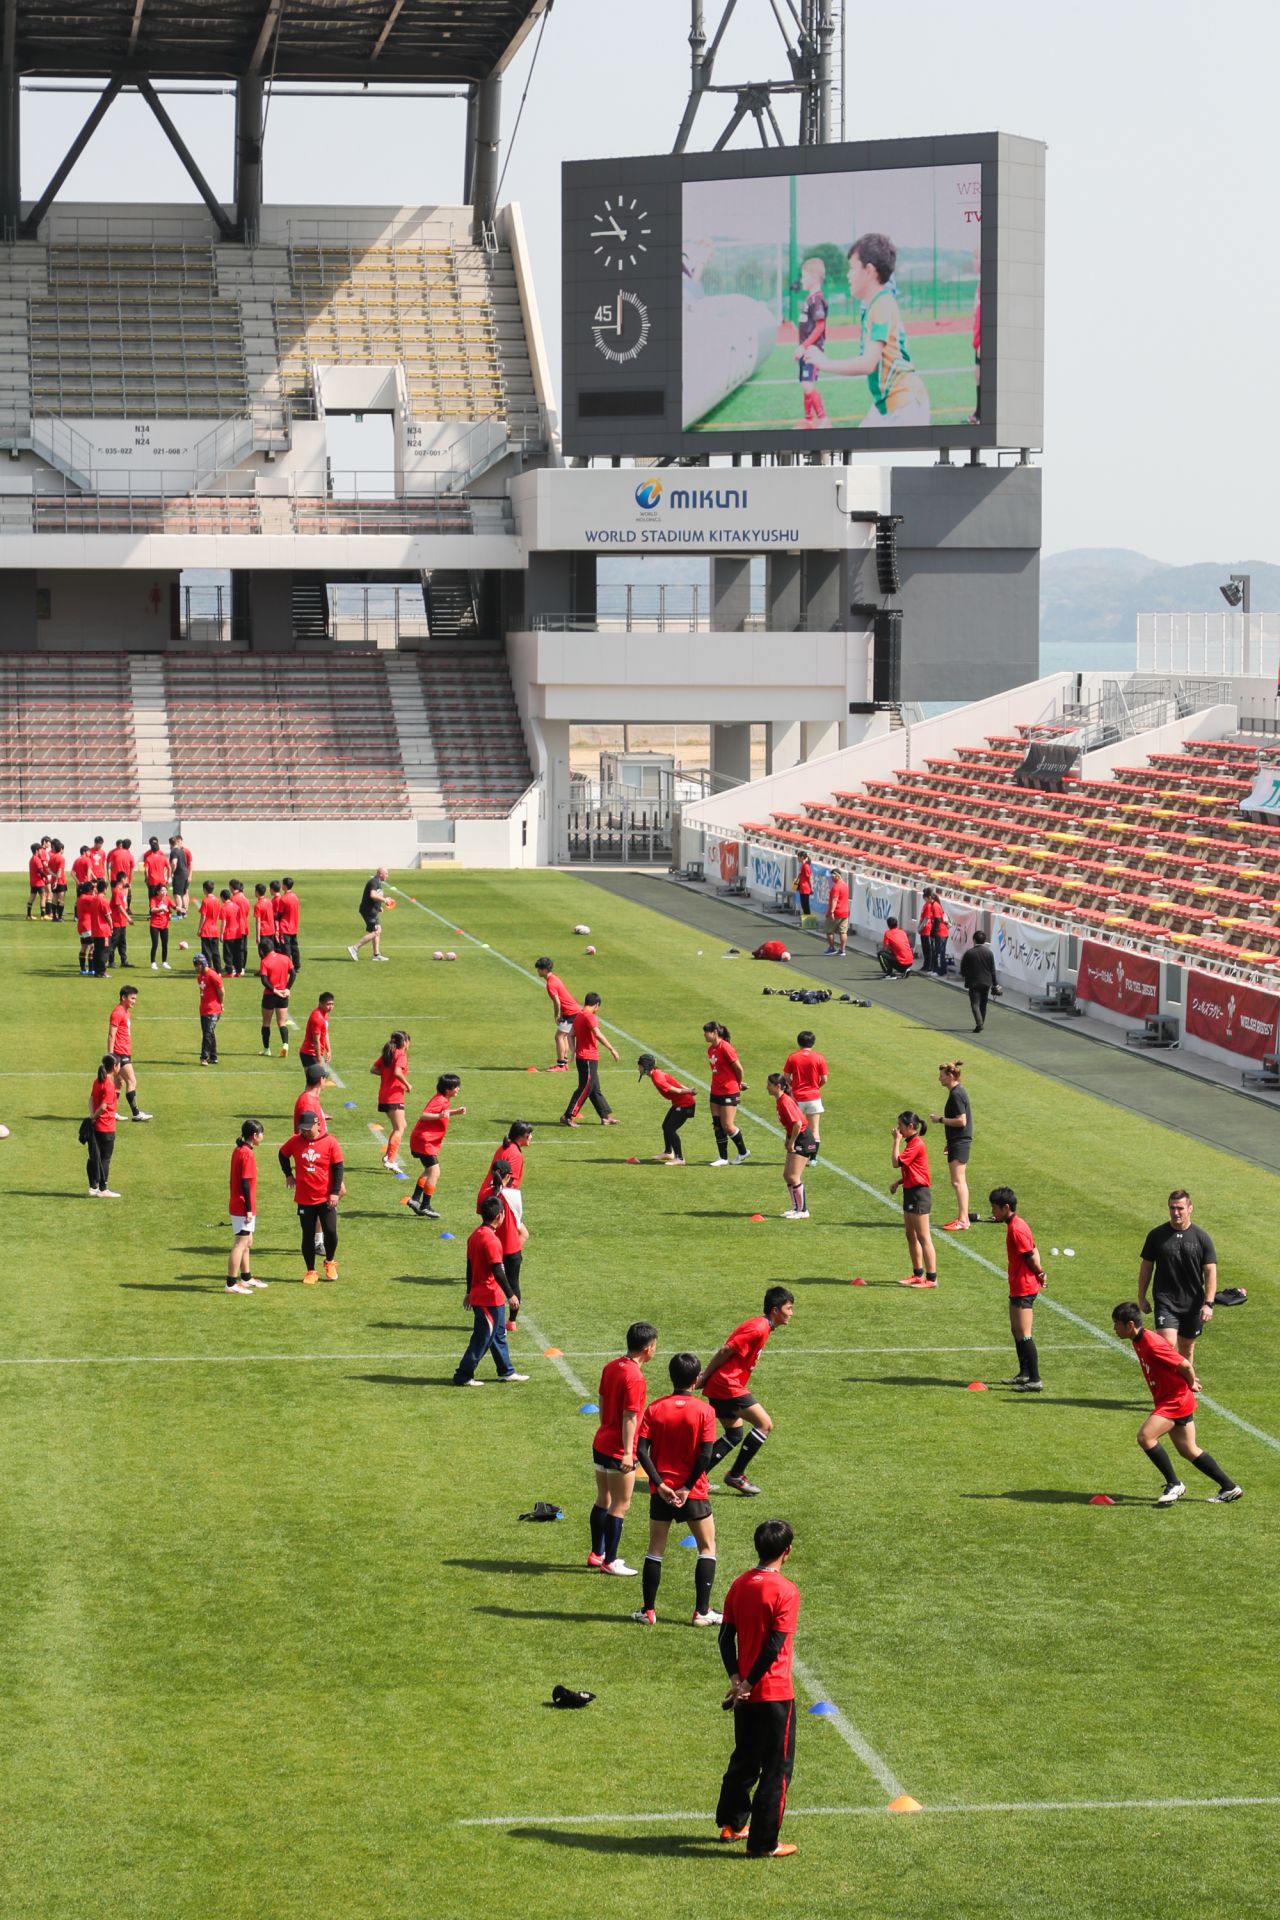 The Kitakyushu project was started to build a base for the Welsh team when it travels to Japan ahead of the 2019 Rugby World Cup, as well as to increase the popularity of the sport in the country.